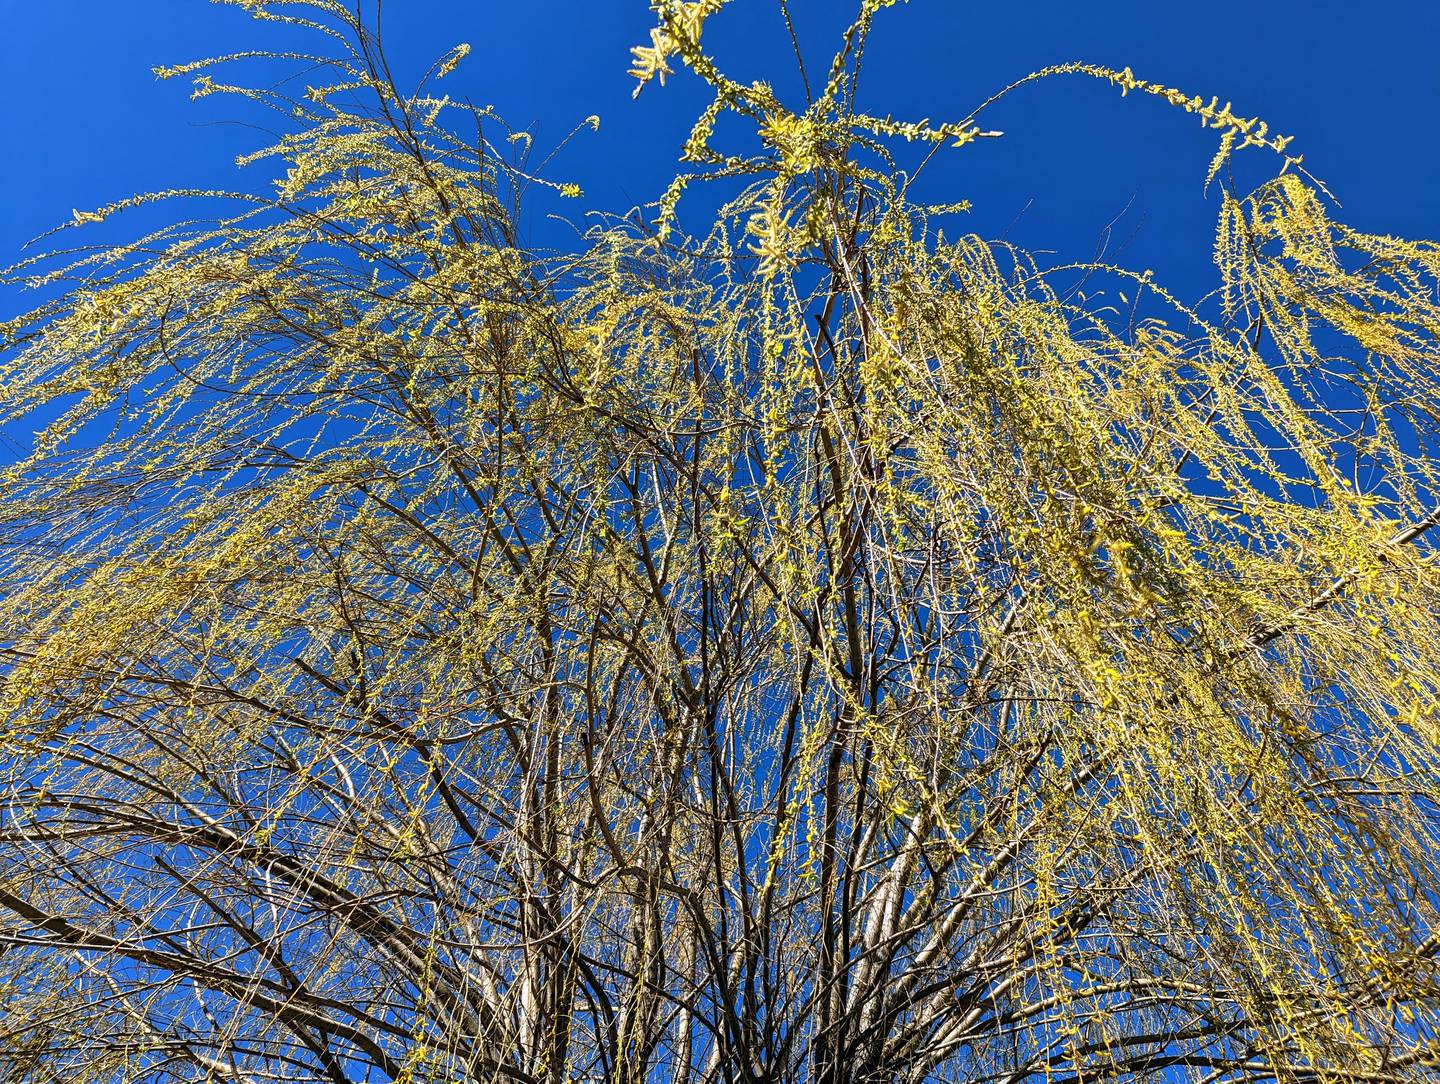 The willows are breaking out in spring green, a color so young it's still really yellow.